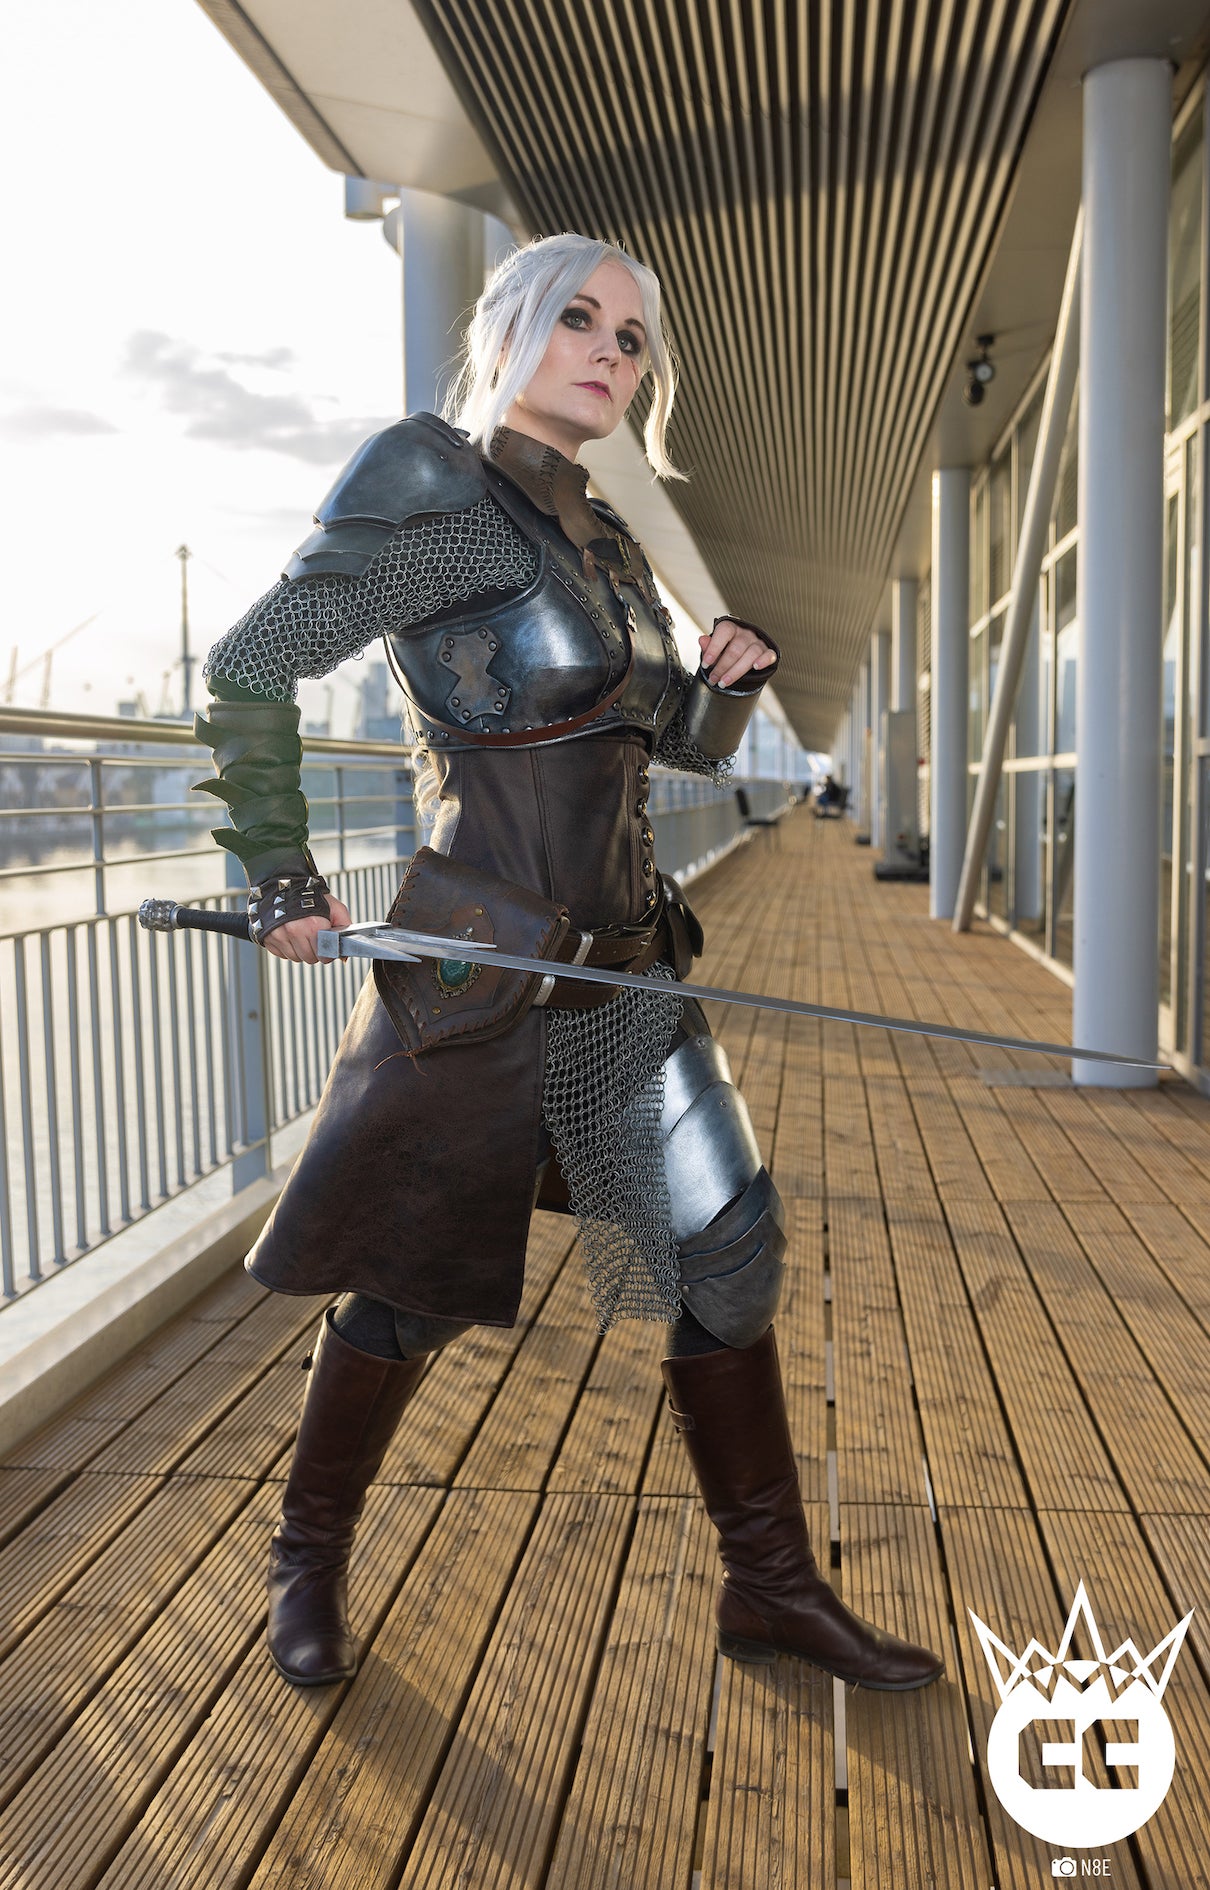 Puffancs as Ciri from The Witcher